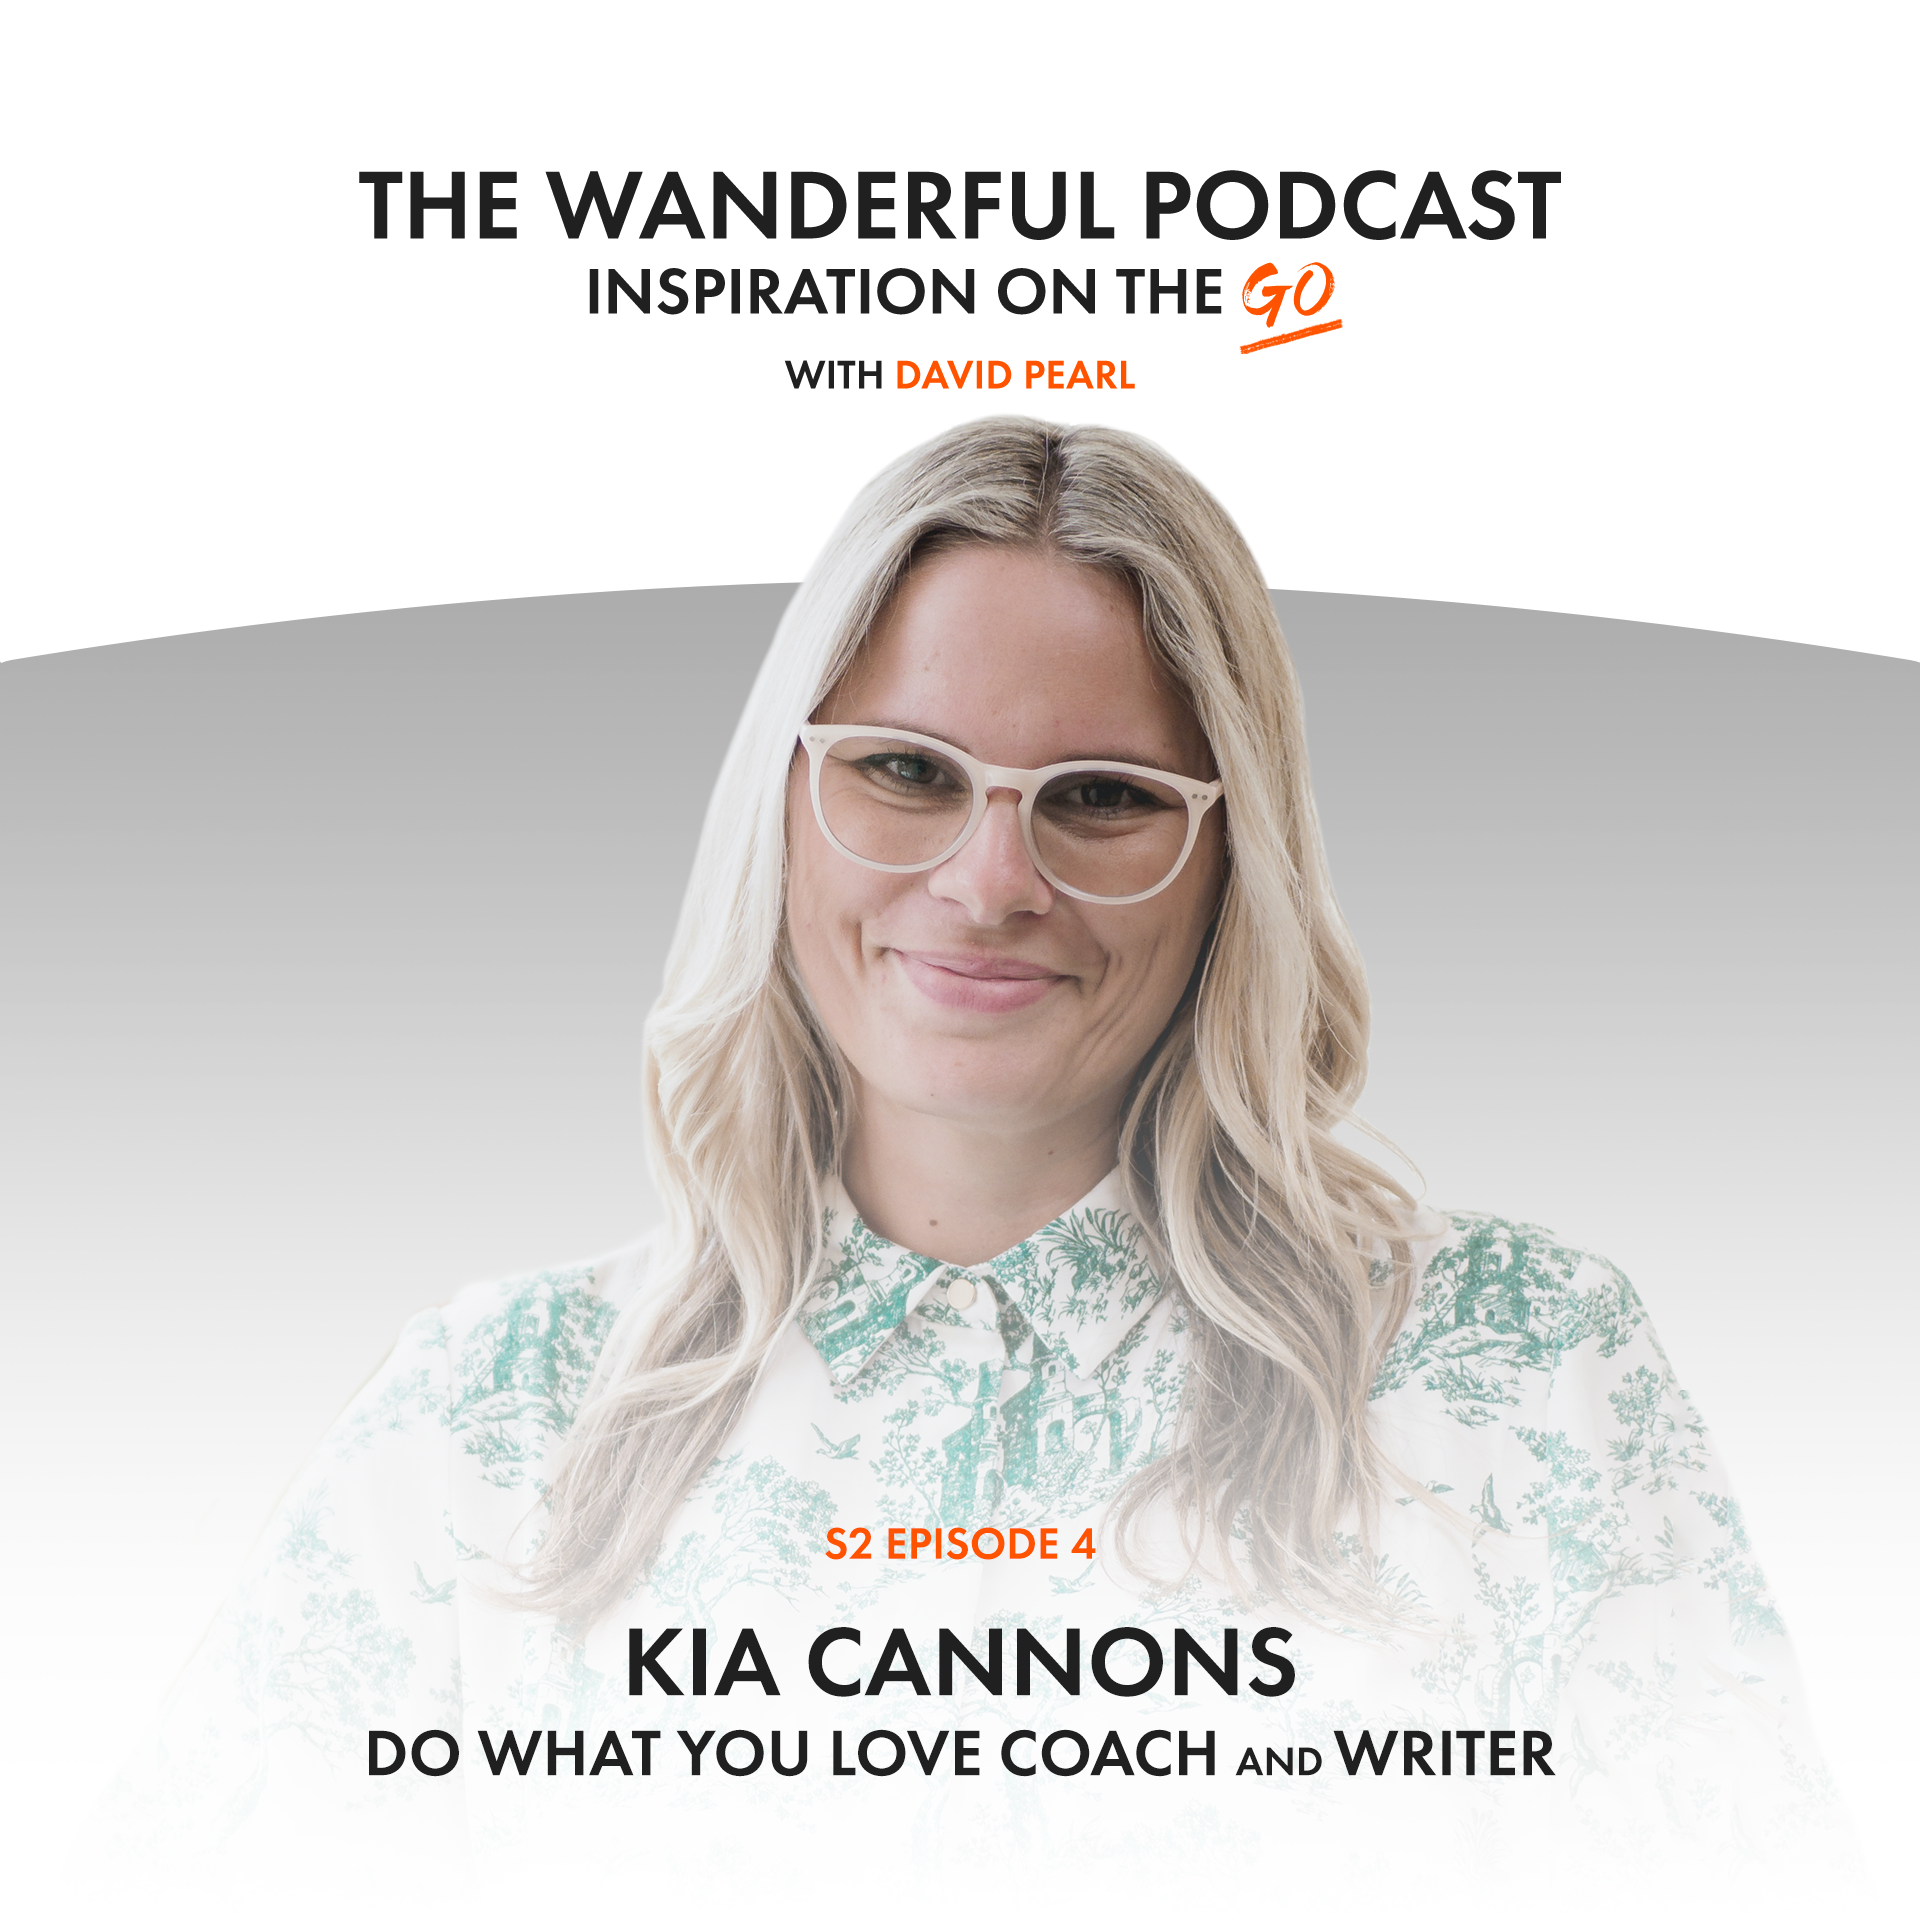 Kia Cannons: The Wanderful Podcast with David Pearl